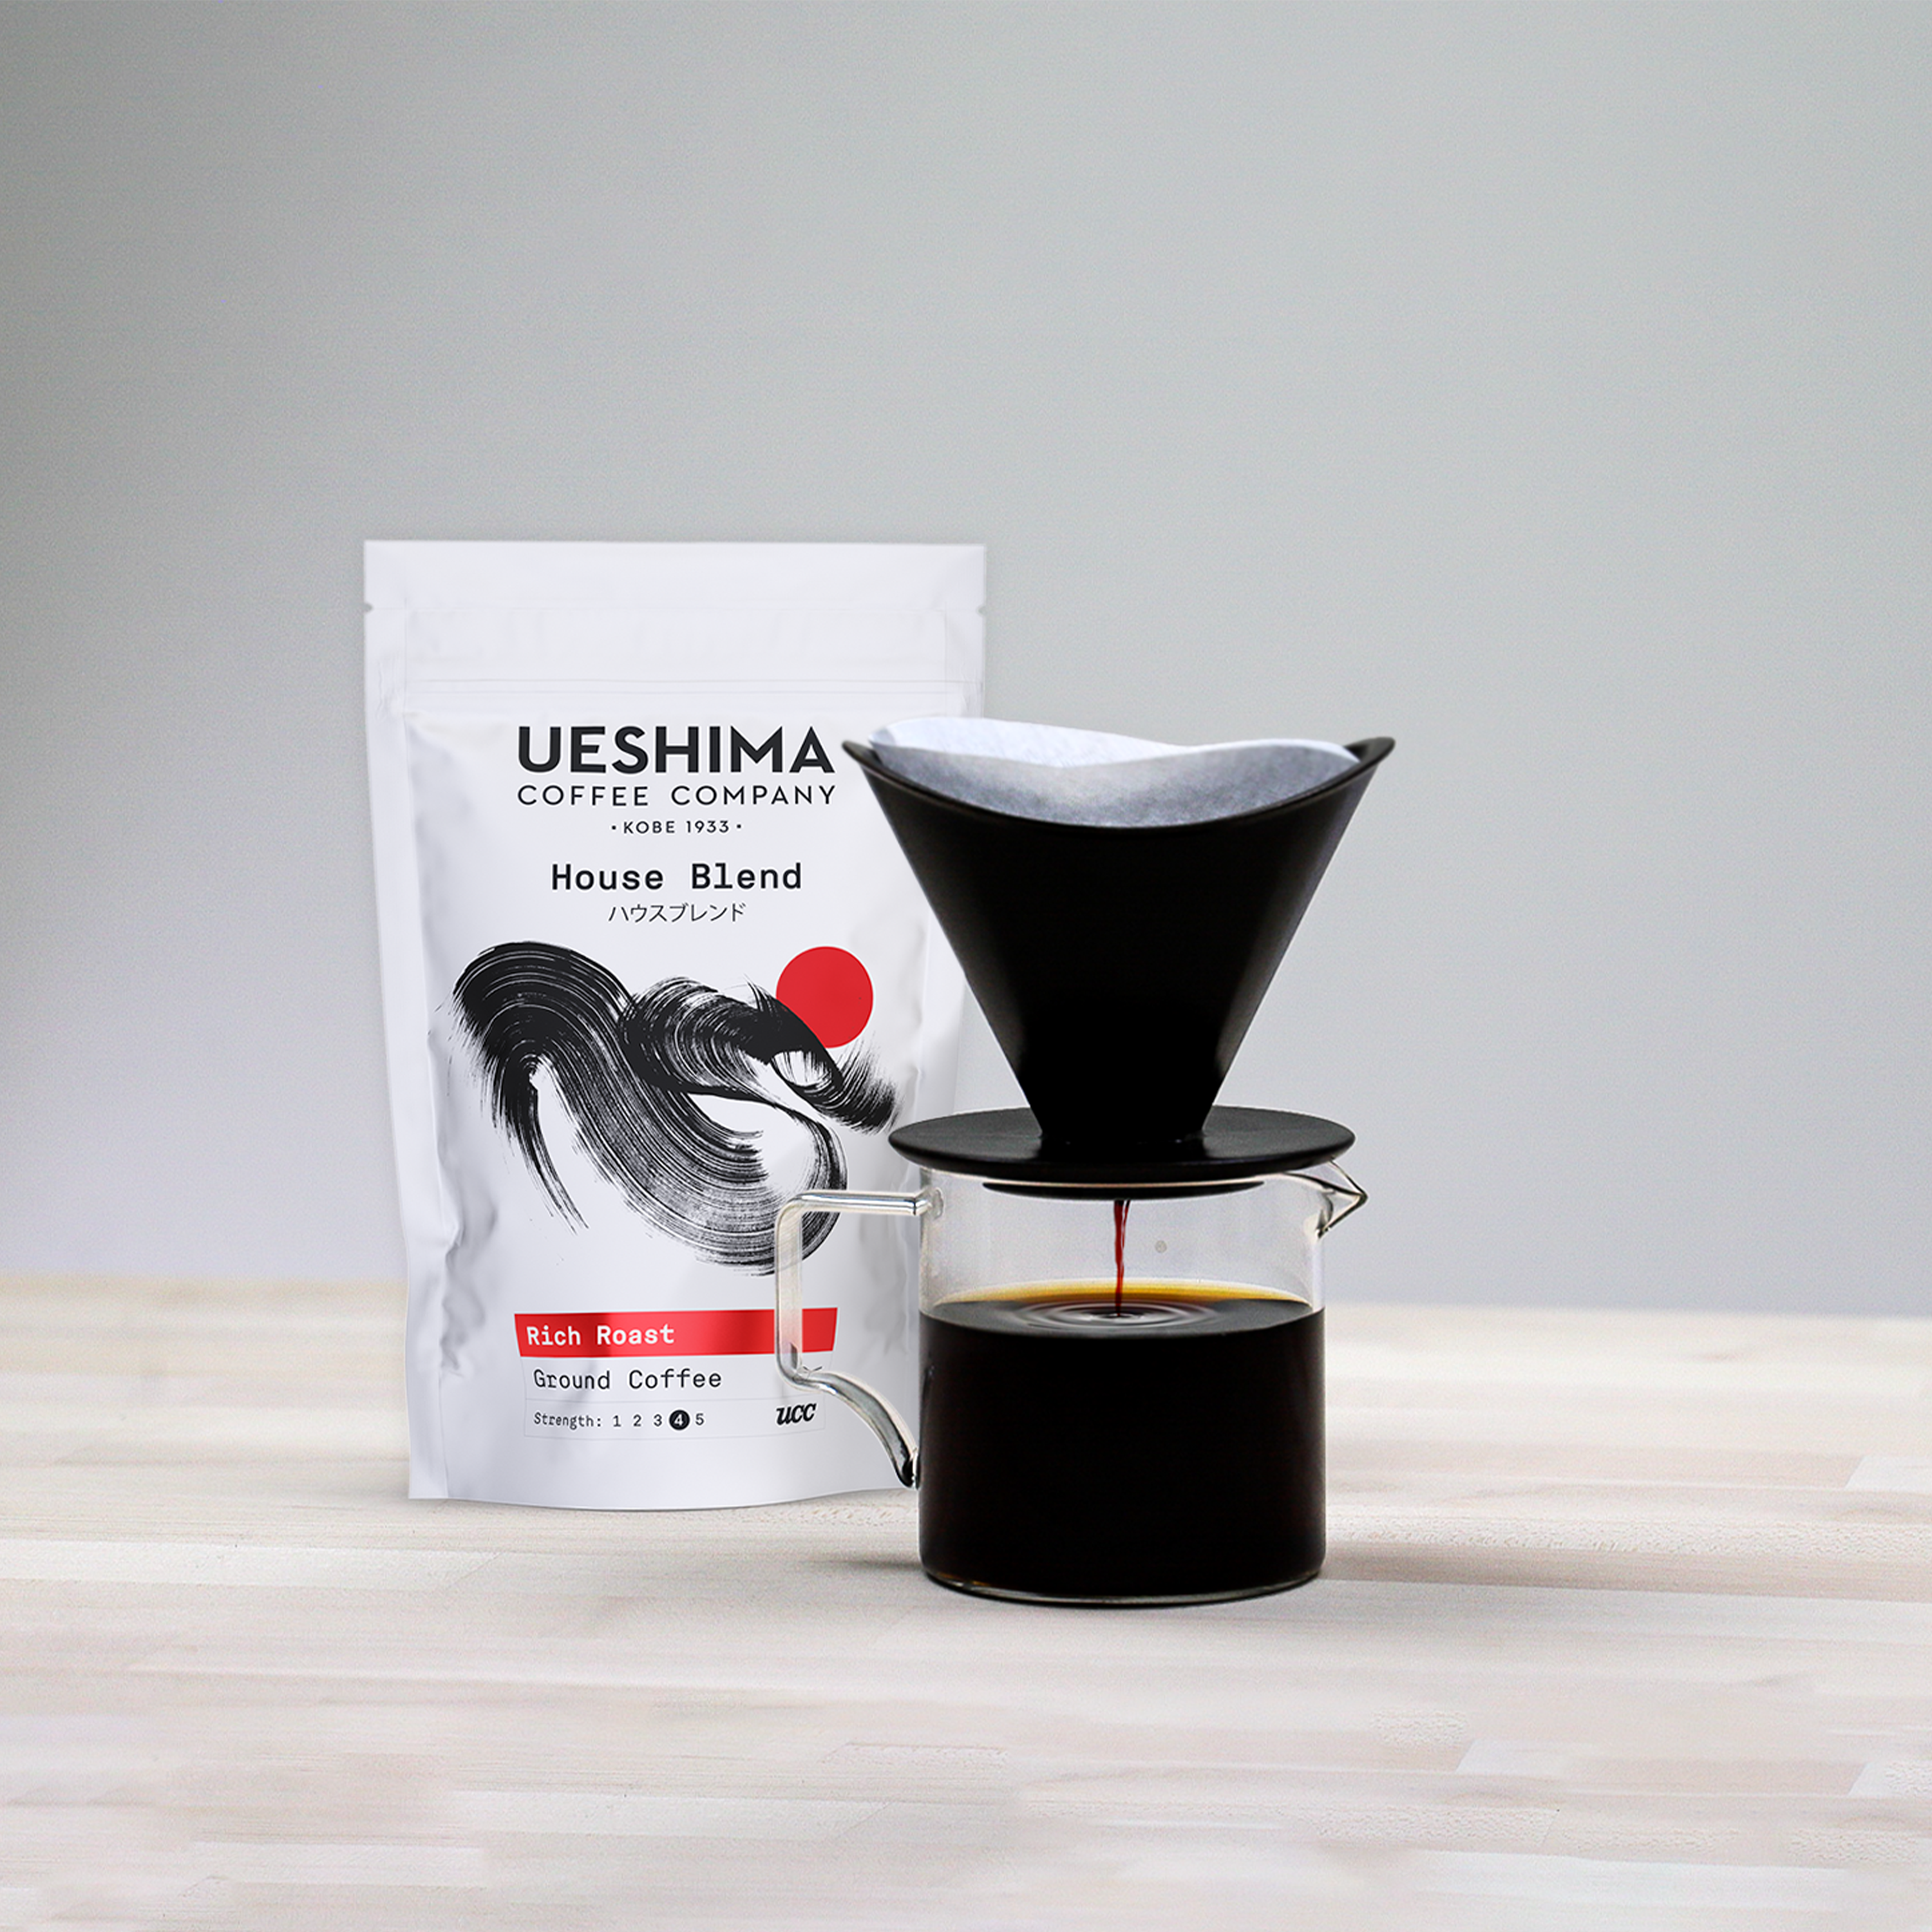 Japanese style coffee brewing at home – Ueshima Coffee Company